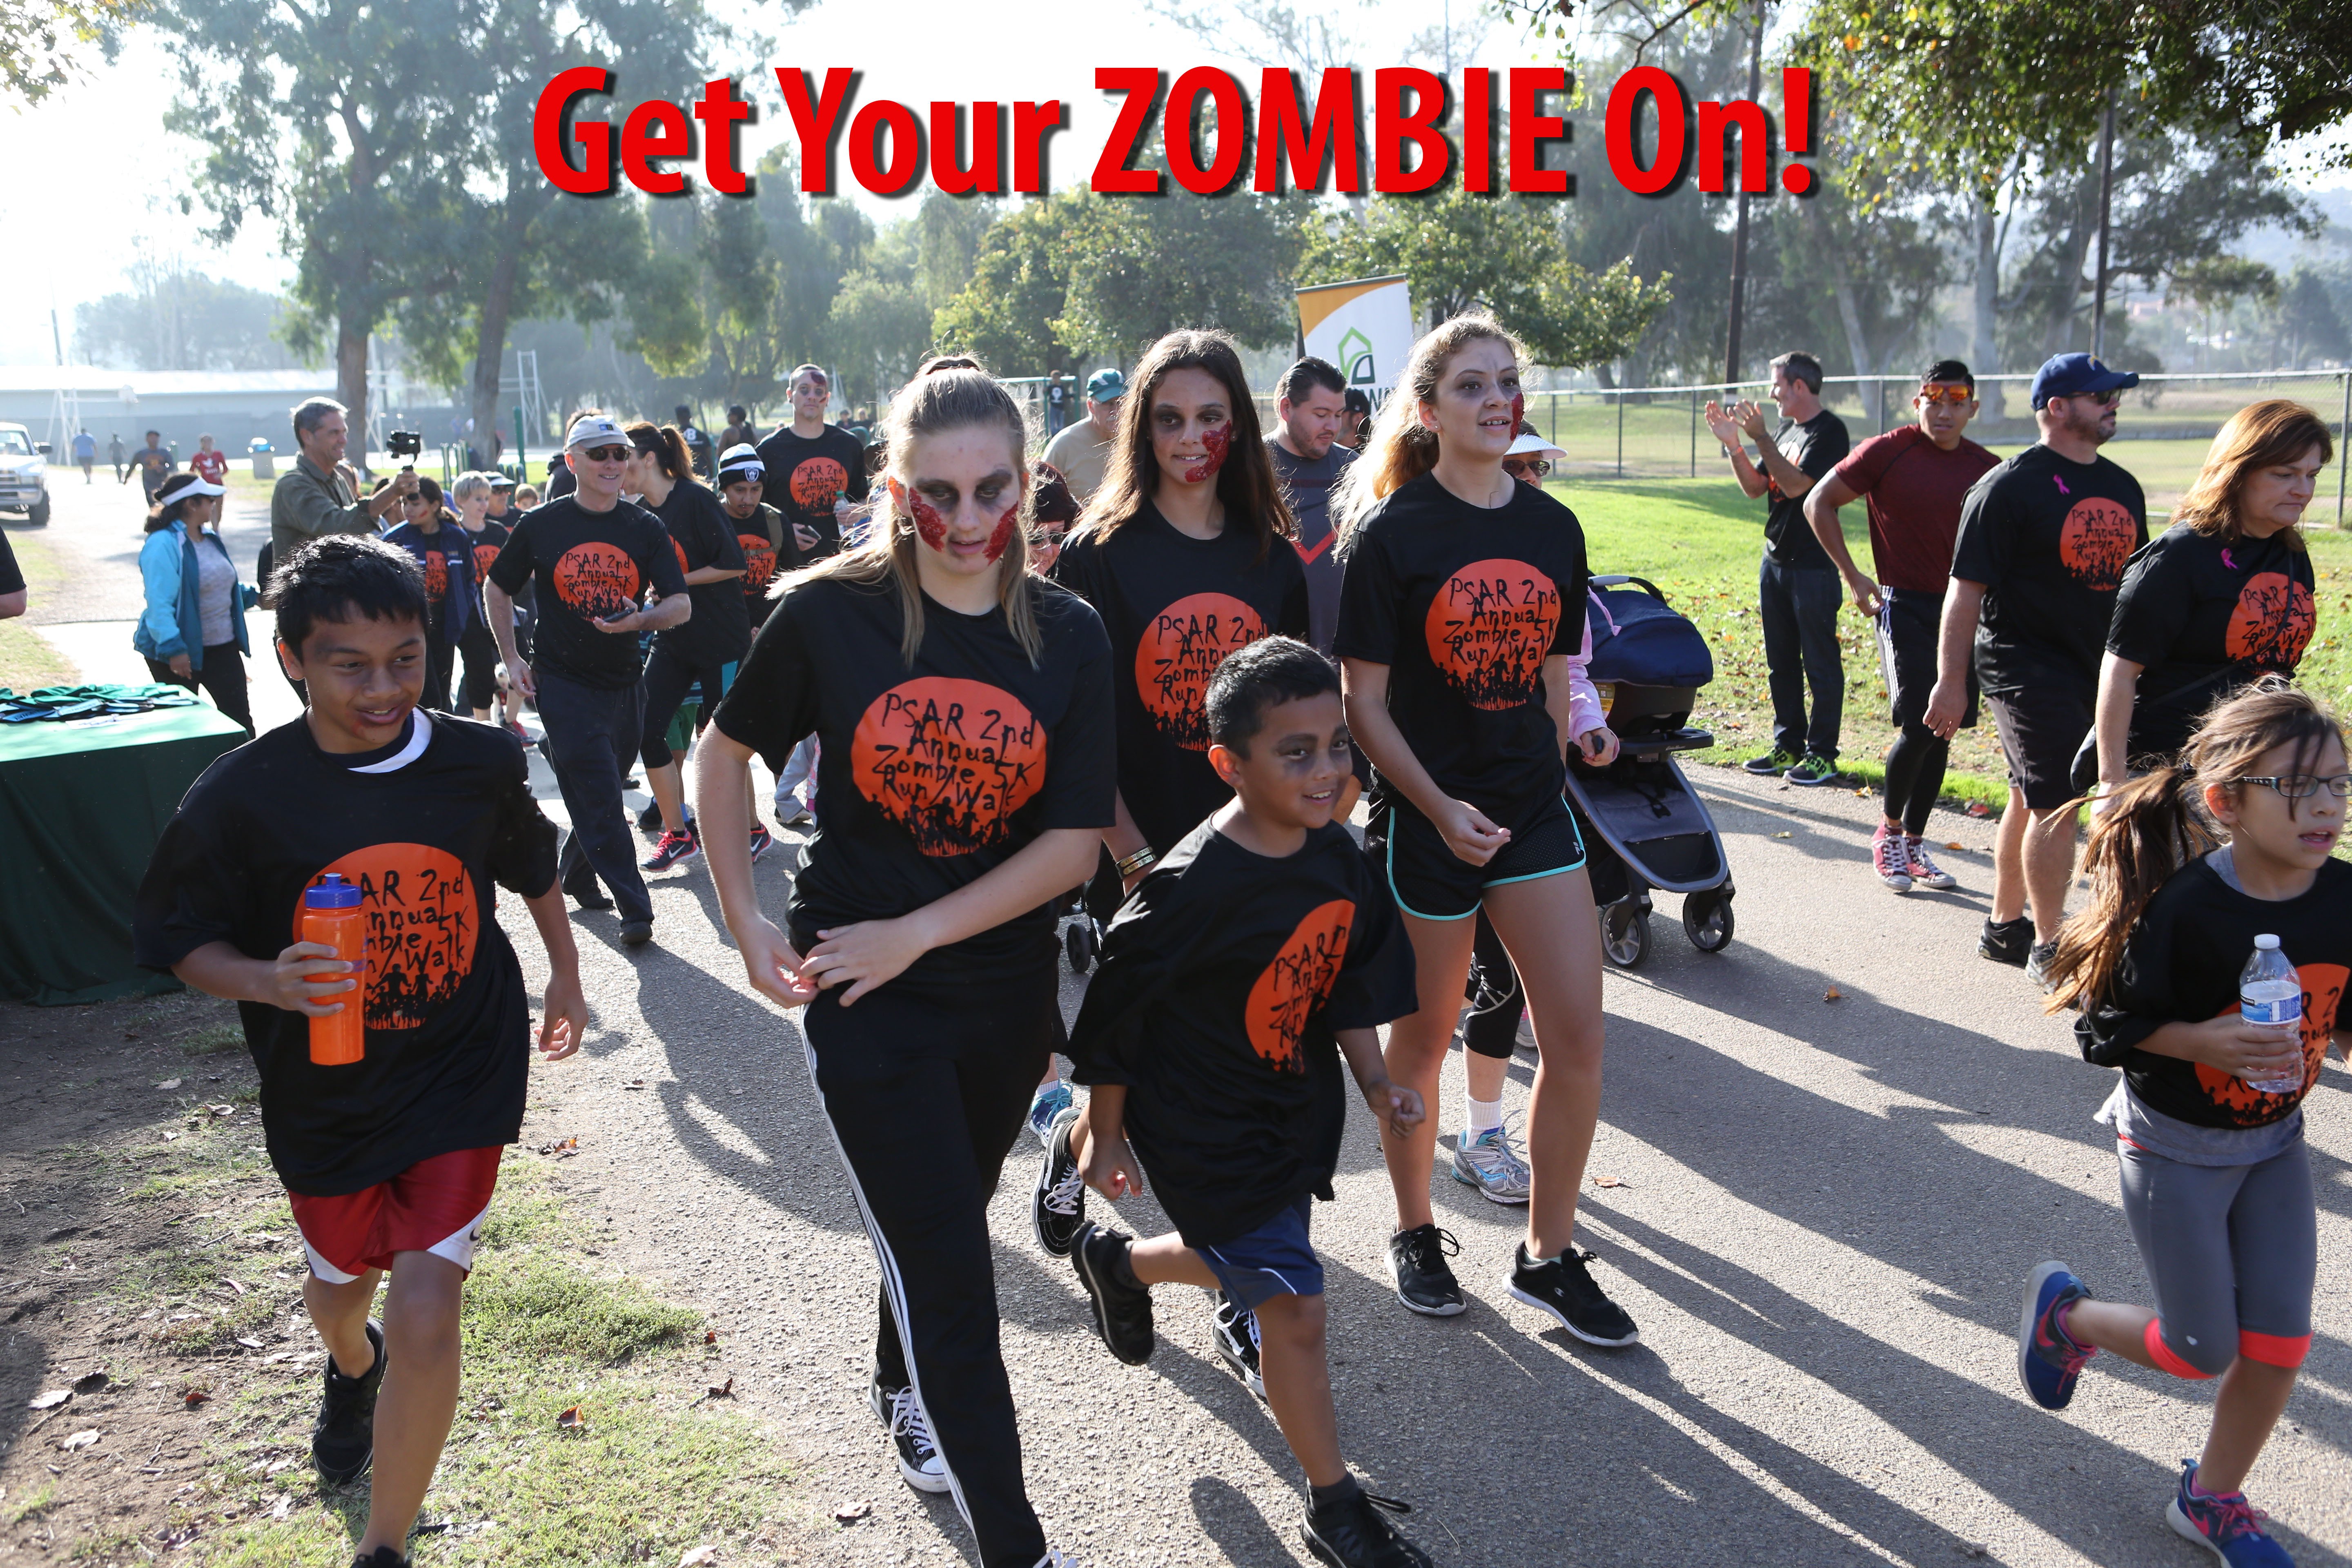 Get your zombie on